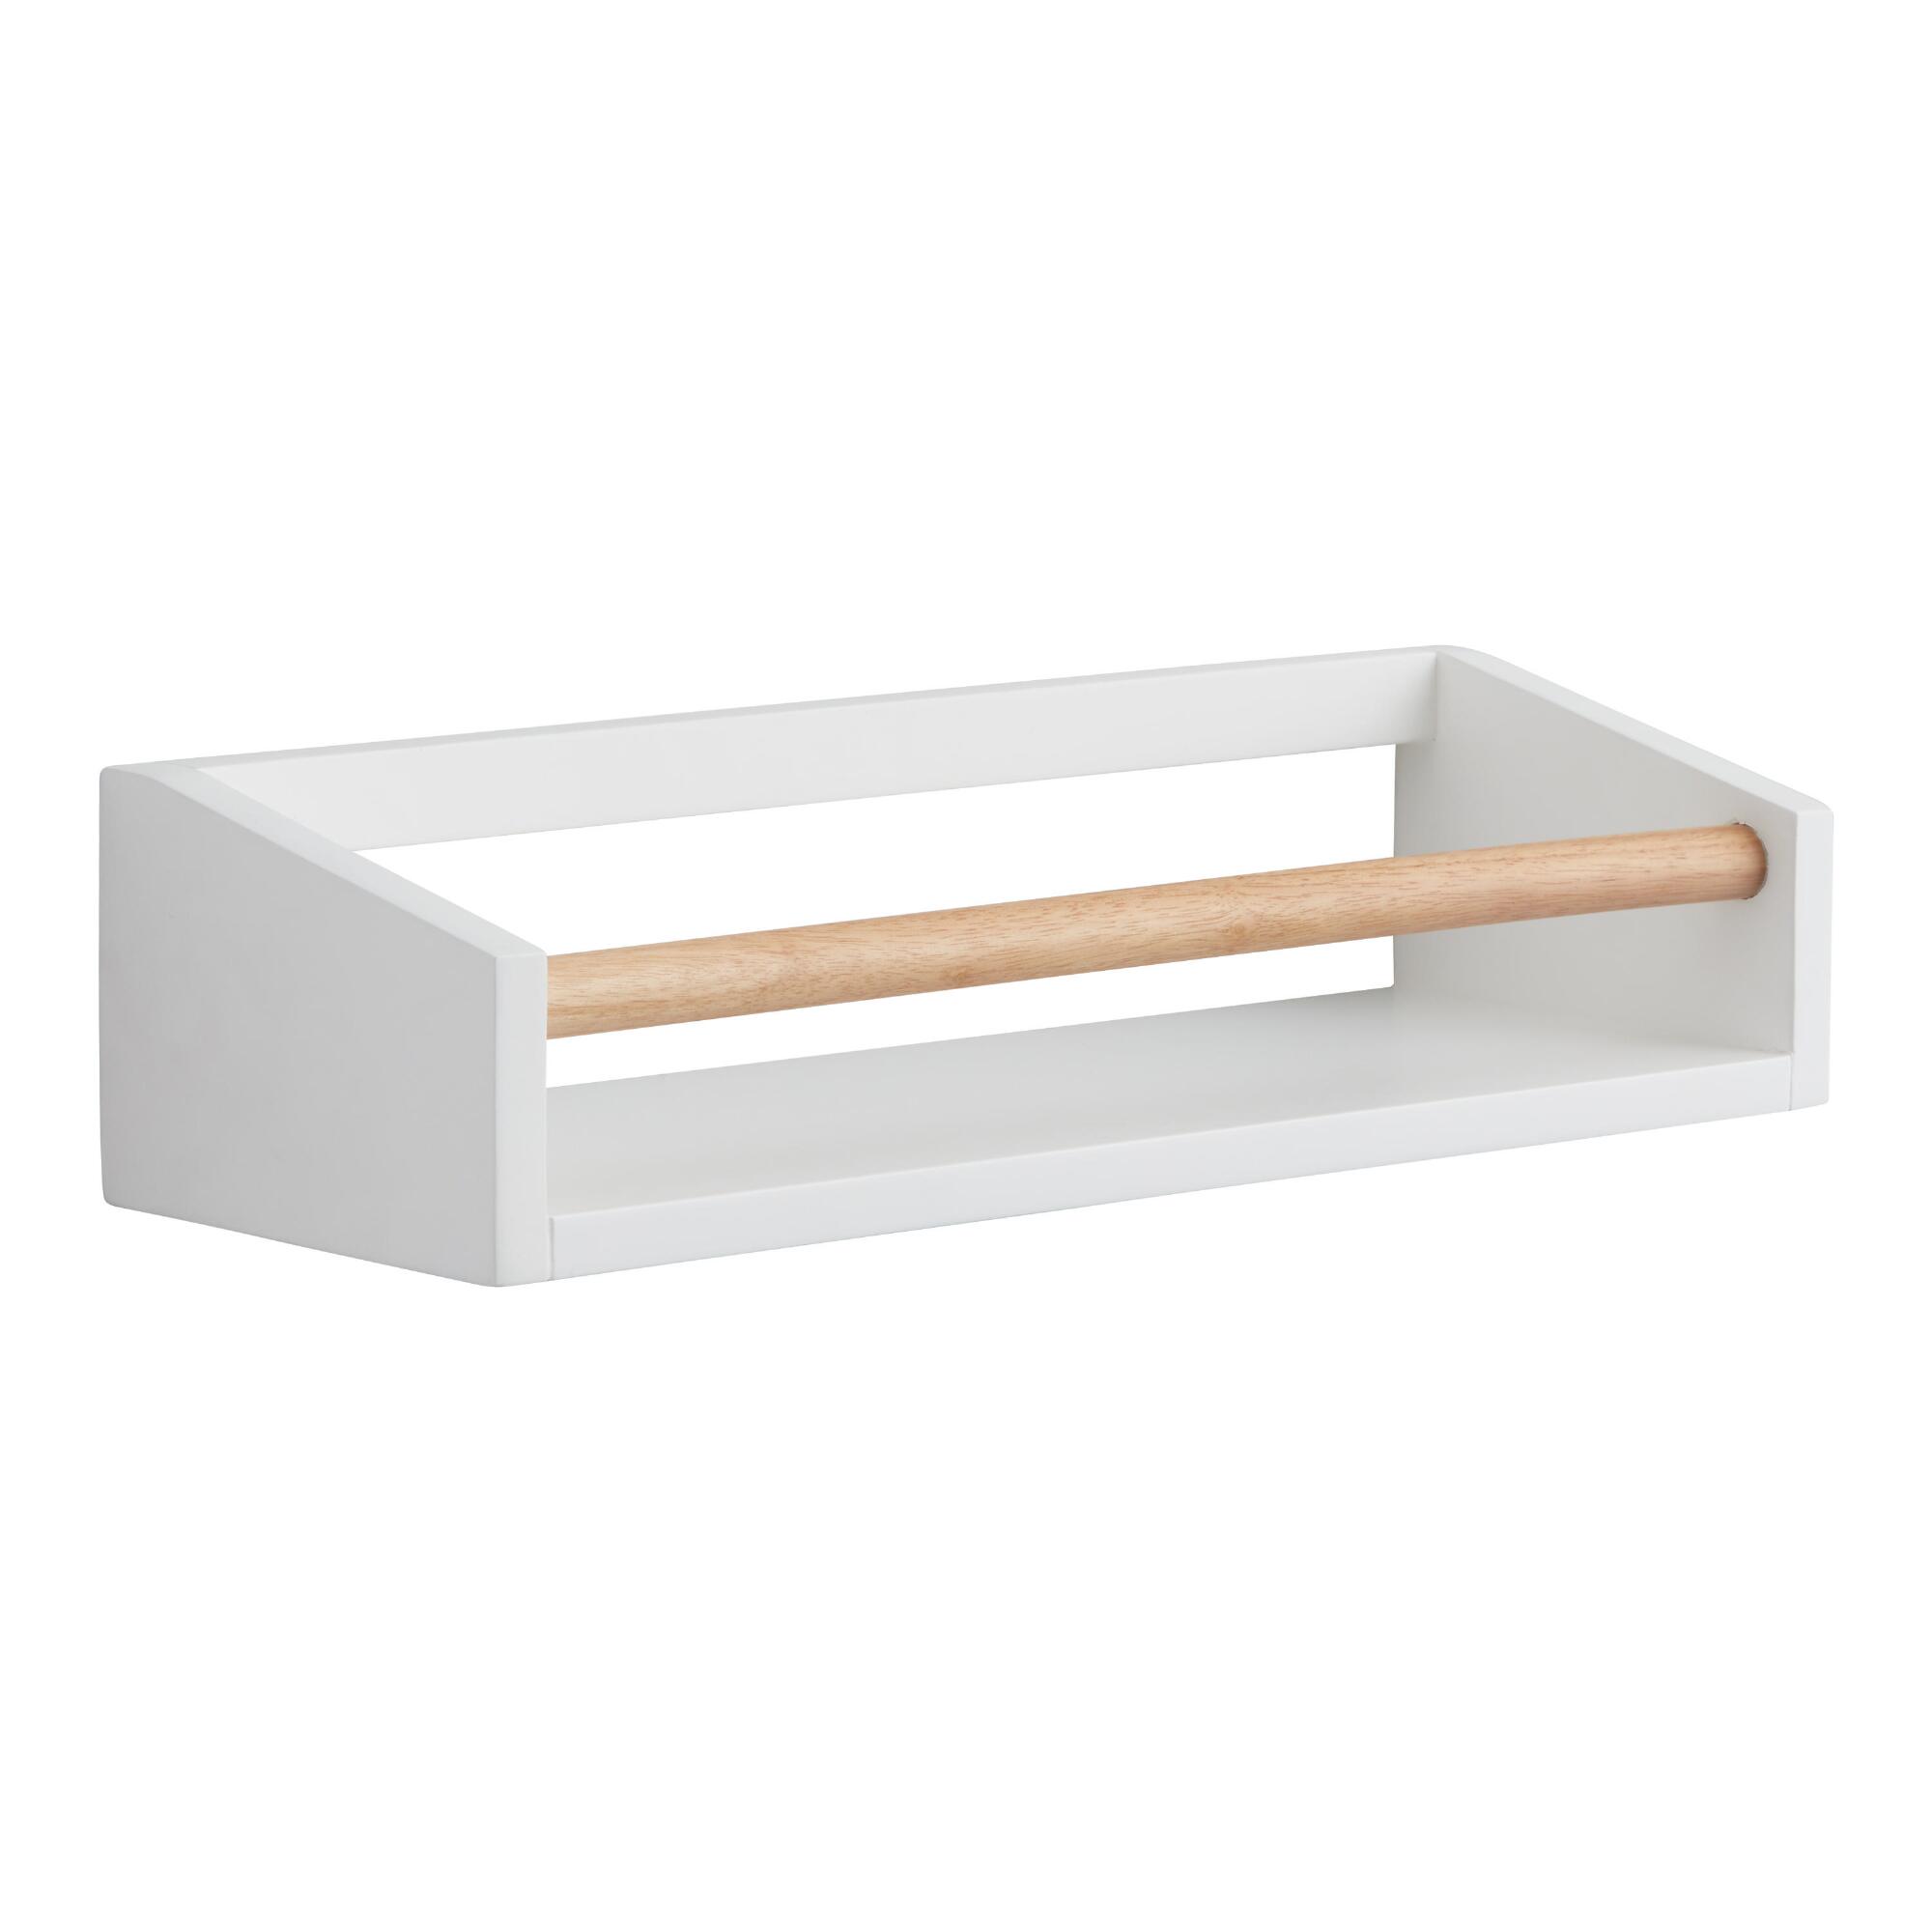 White And Natural Pine Wood Wall Shelf With Bar by World Market